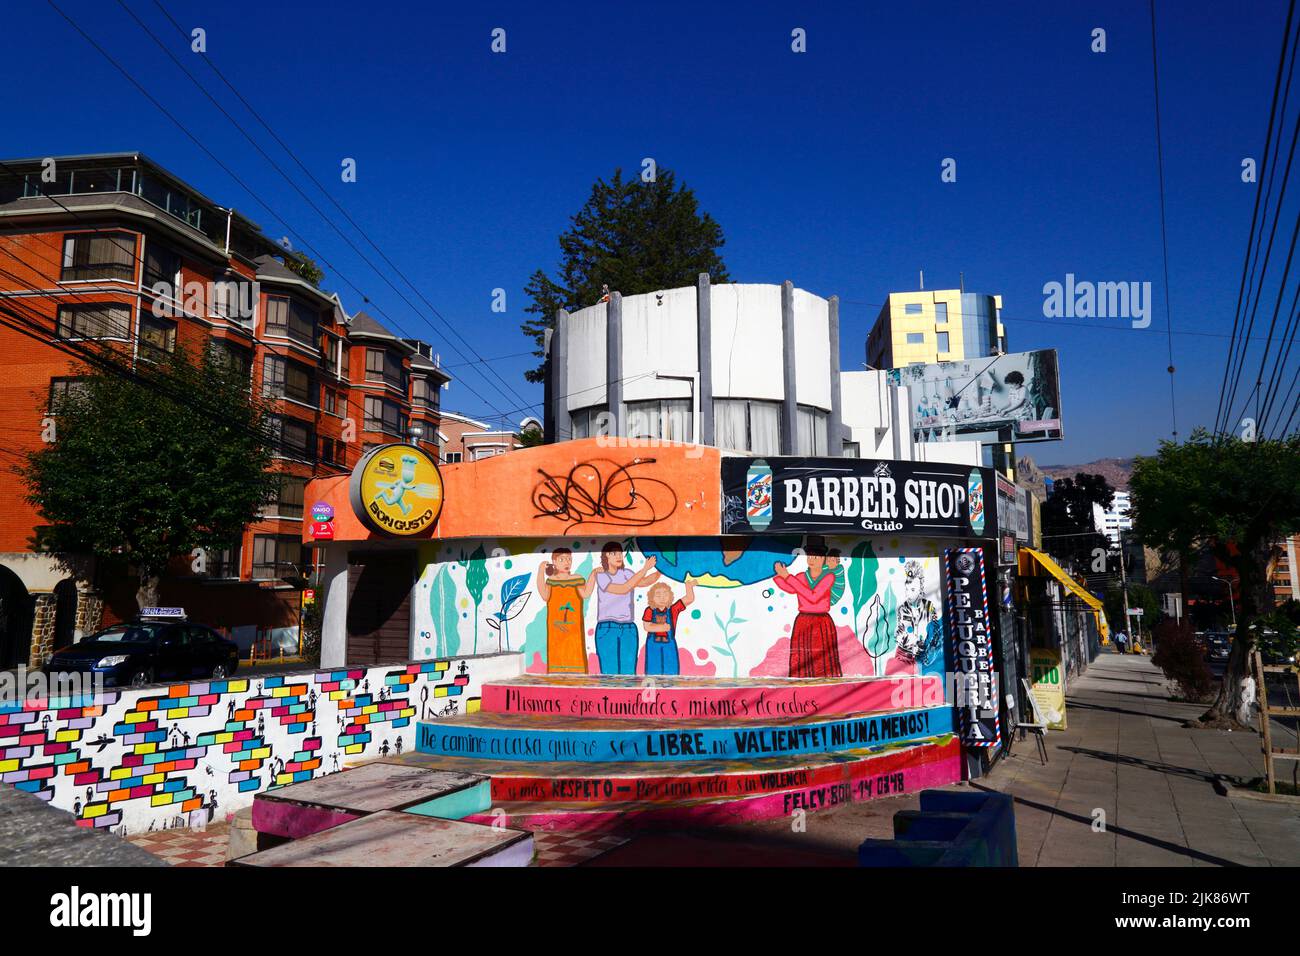 29th June 2022, Av Ballivian, Calacoto, La Paz, Bolivia. Mural on the wall of a barber shop in La Paz's Zona Sur district painted by feminist groups demanding equal opportunities and rights for women, and protesting against domestic violence and violence against women. Stock Photo